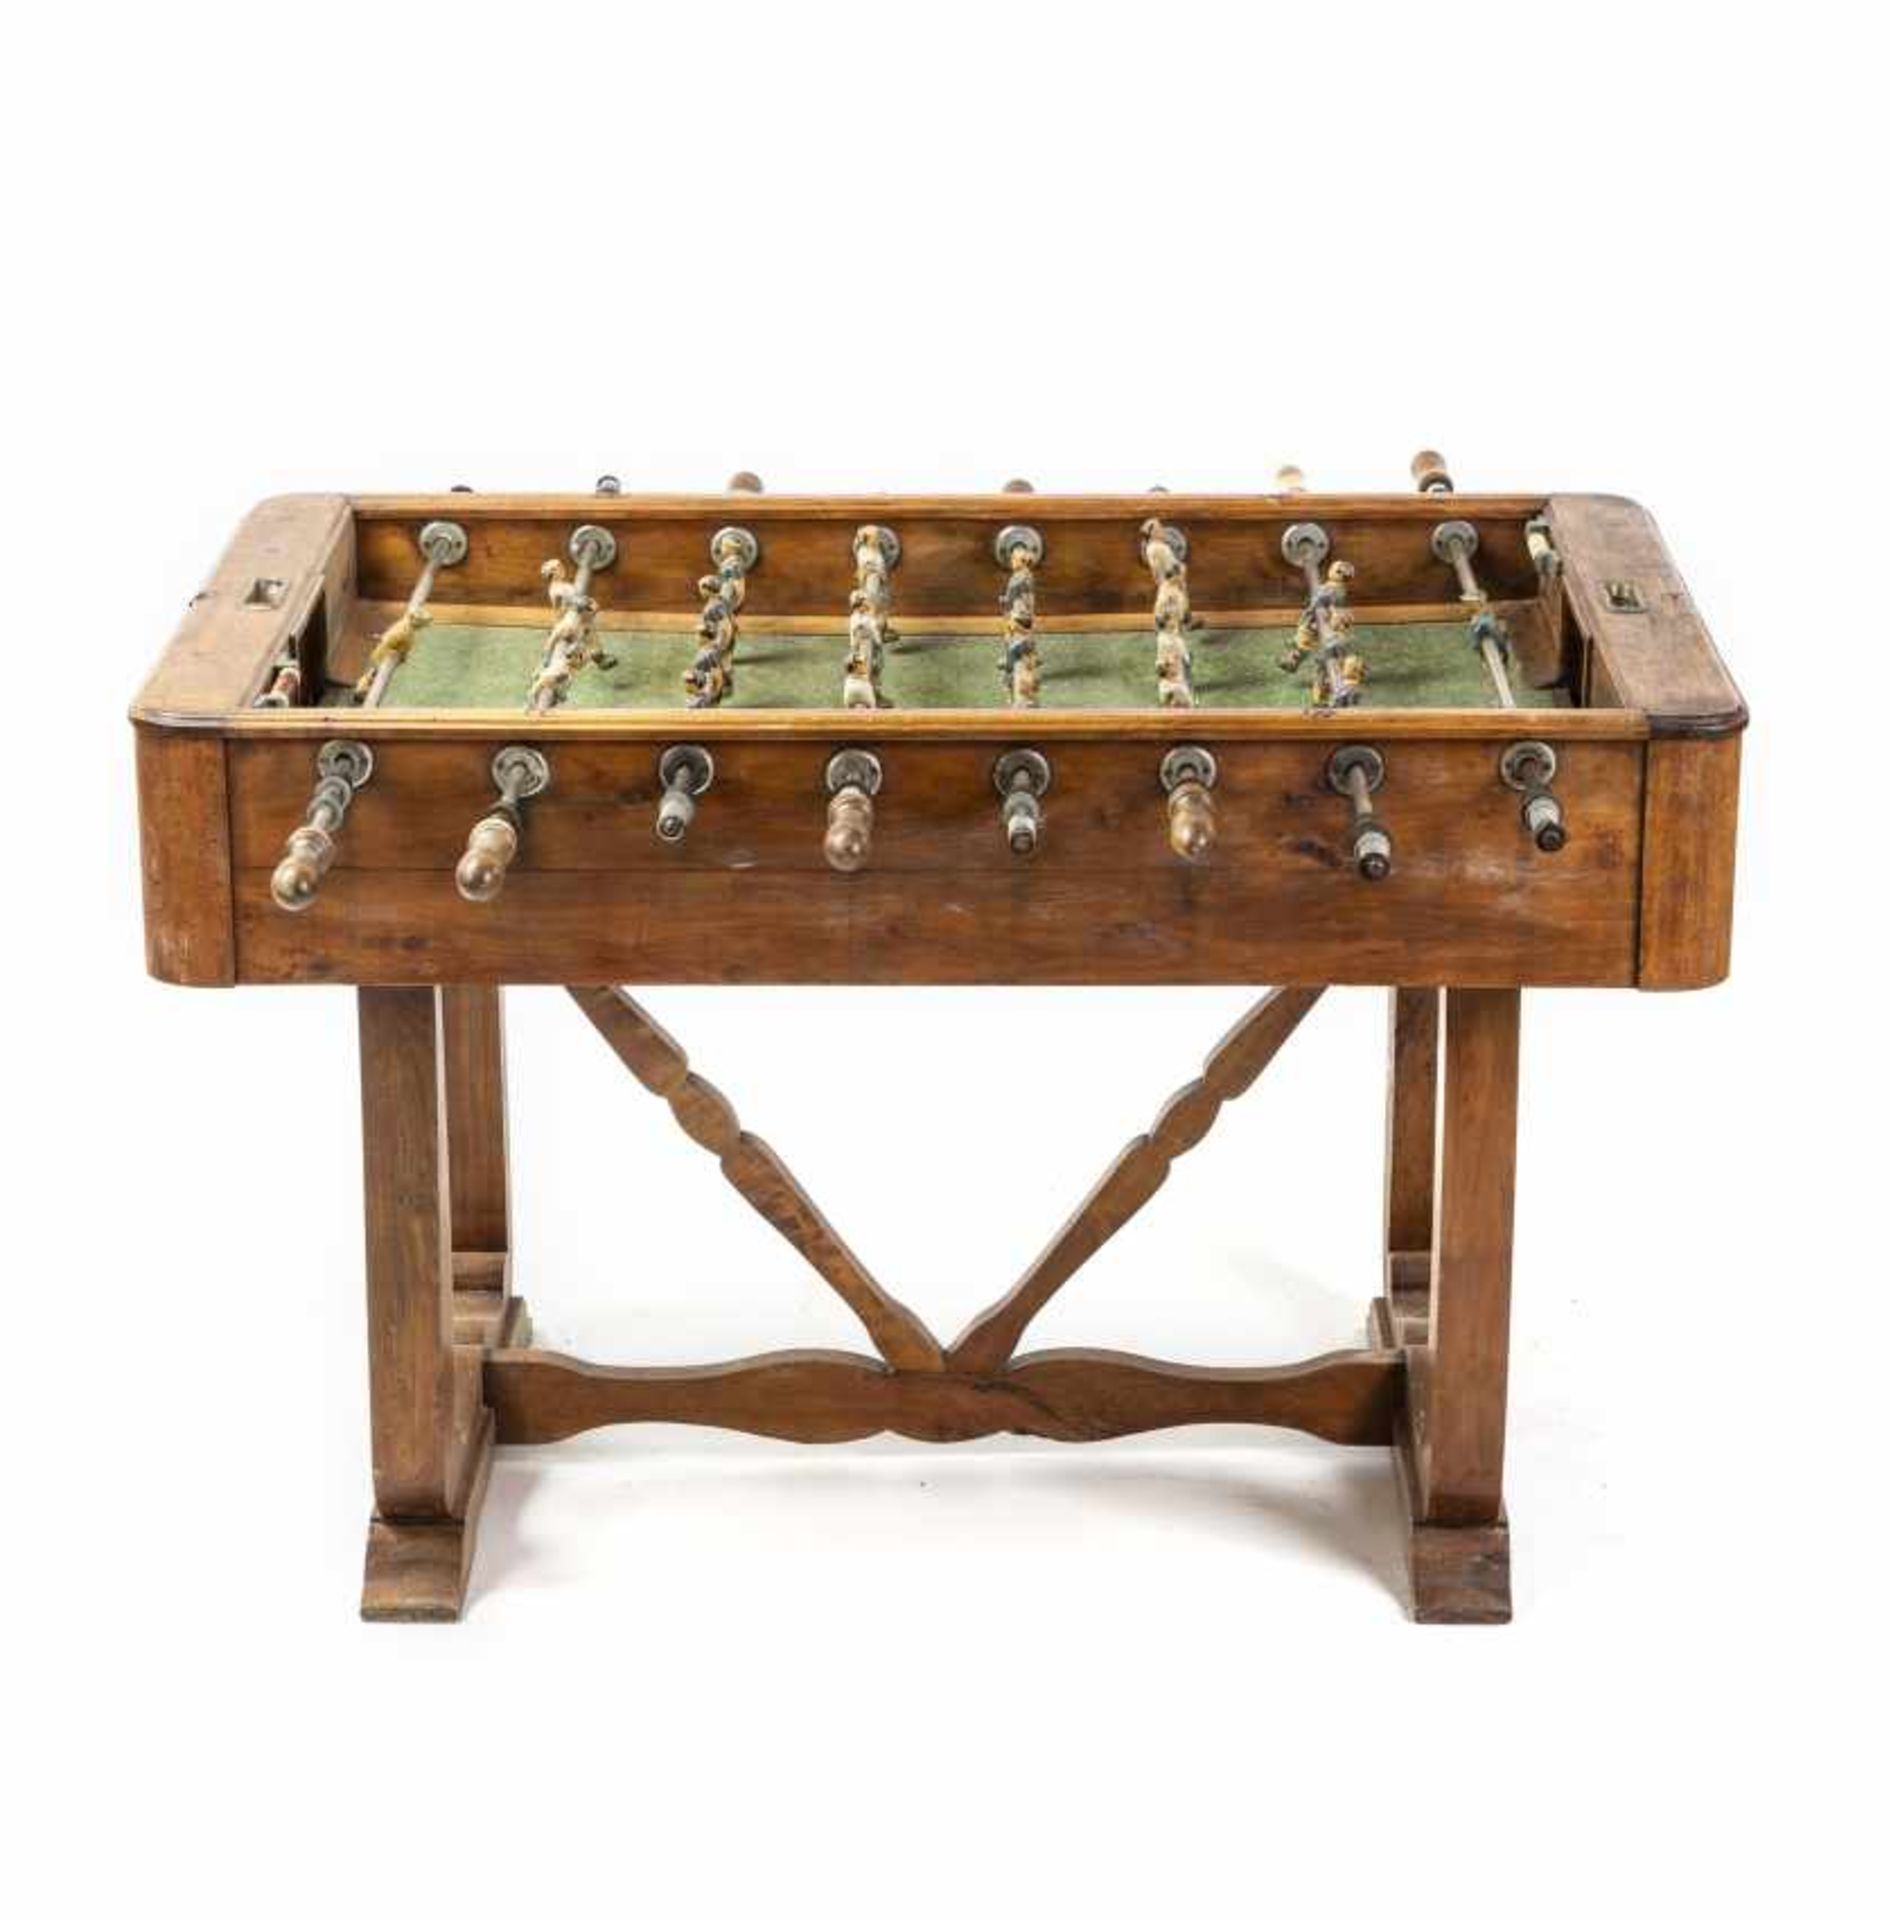 Spanish table football in wood and metal, circa 1940-1950Spanish table football in wood and metal,